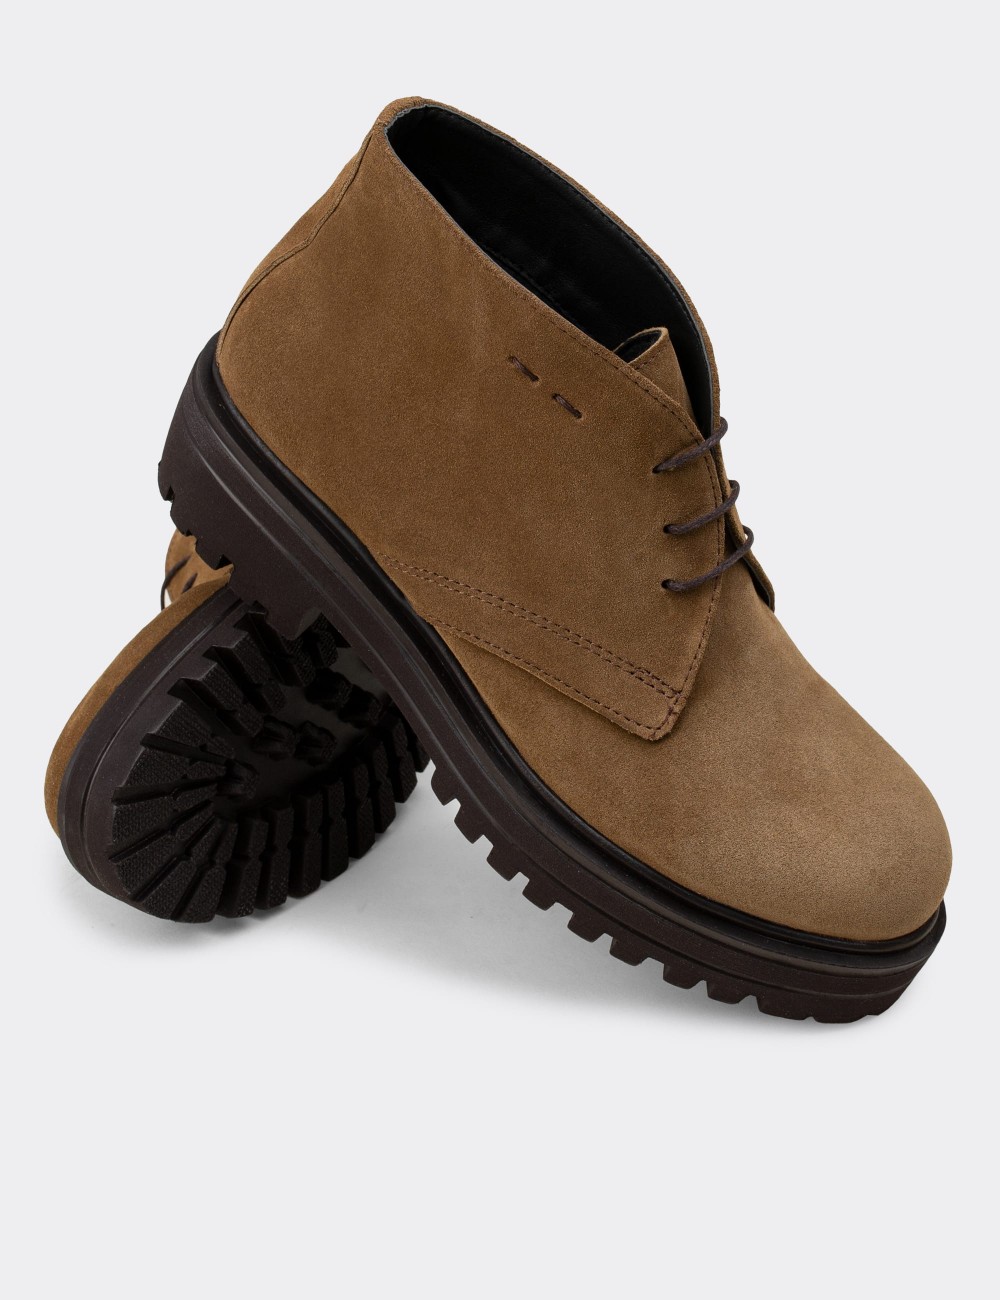 Tan Suede Leather Desert Boots - 01847ZTBAE02